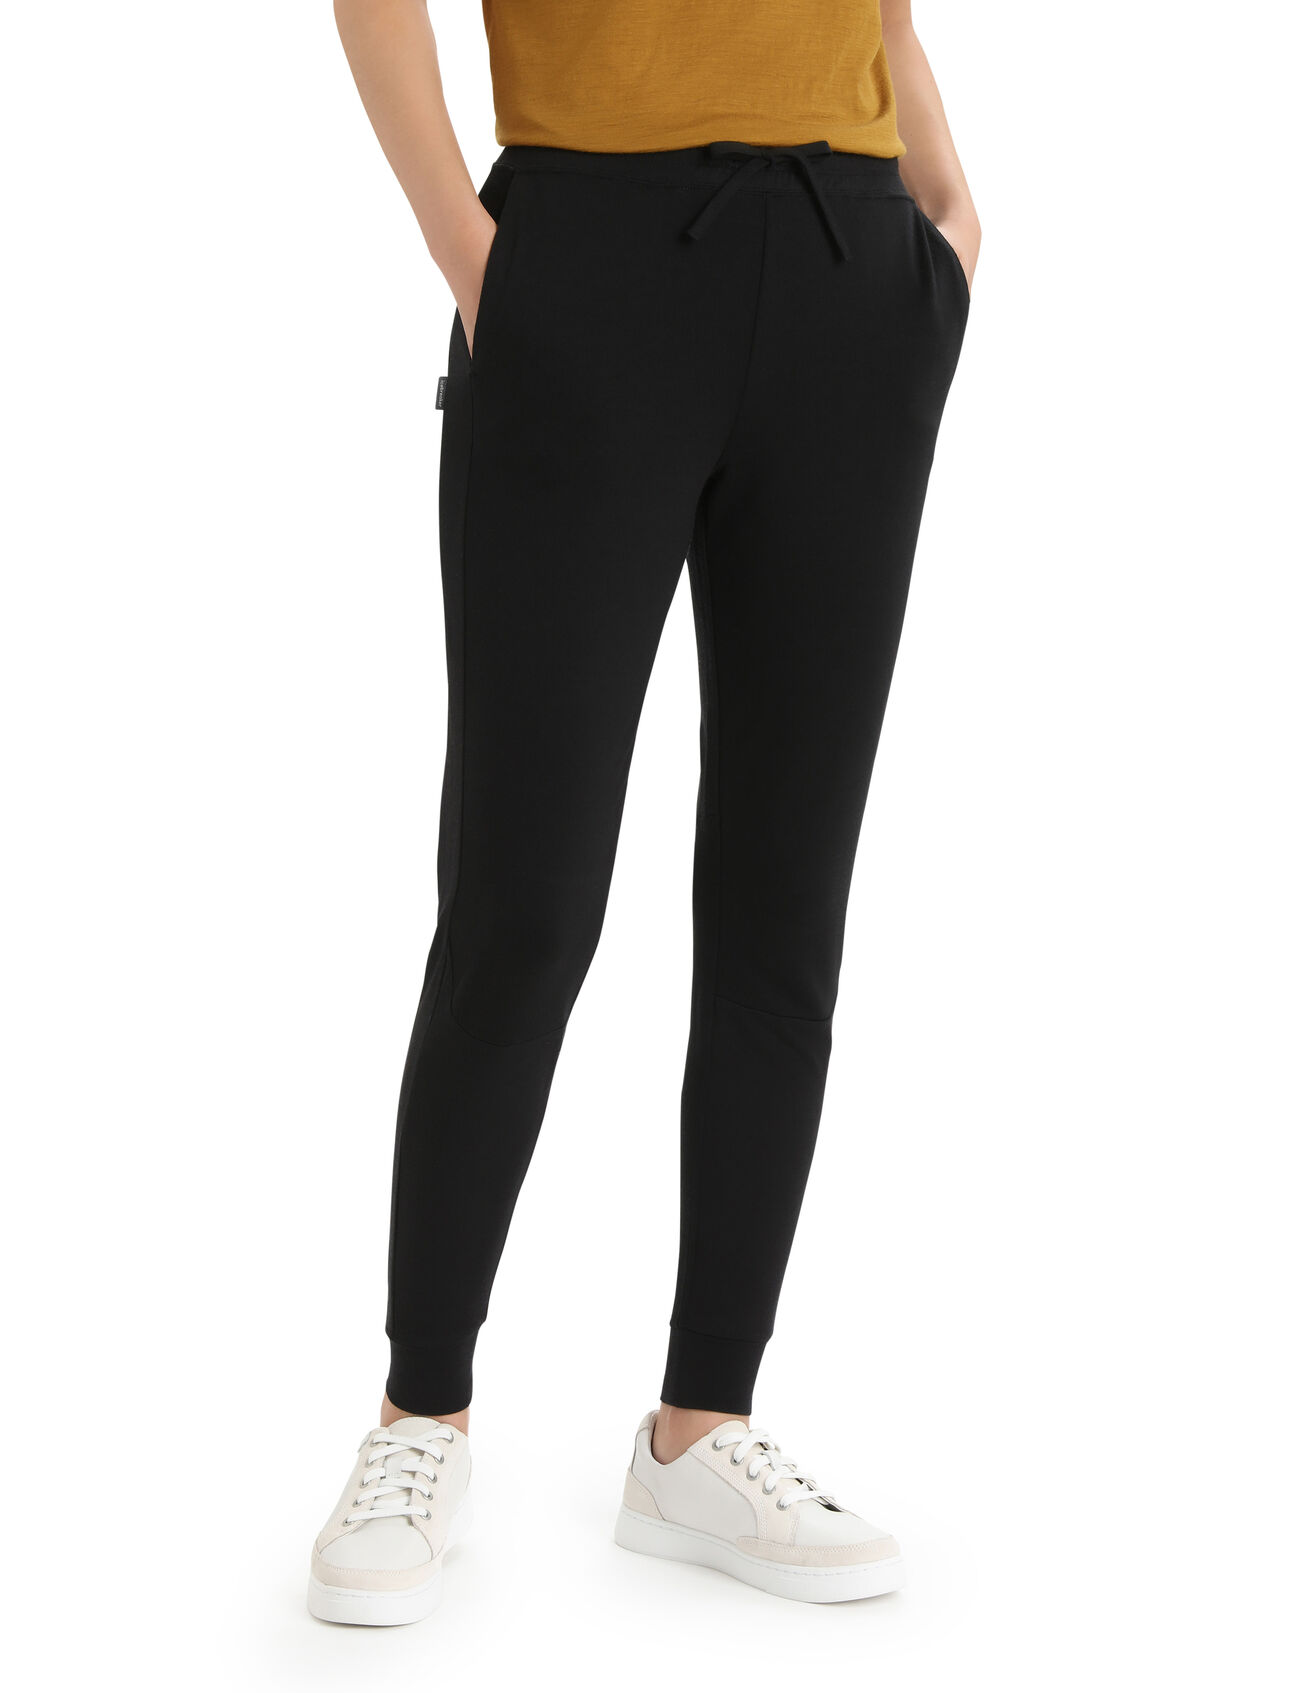 Womens ZoneKnit™ Merino Jogger A highly breathable jogger pant designed for cold, aerobic days outside, the ZoneKnit™ Jogger combines a merino terry fabric with body-mapped panels of merino eyelet mesh for enhanced temperature regulation.